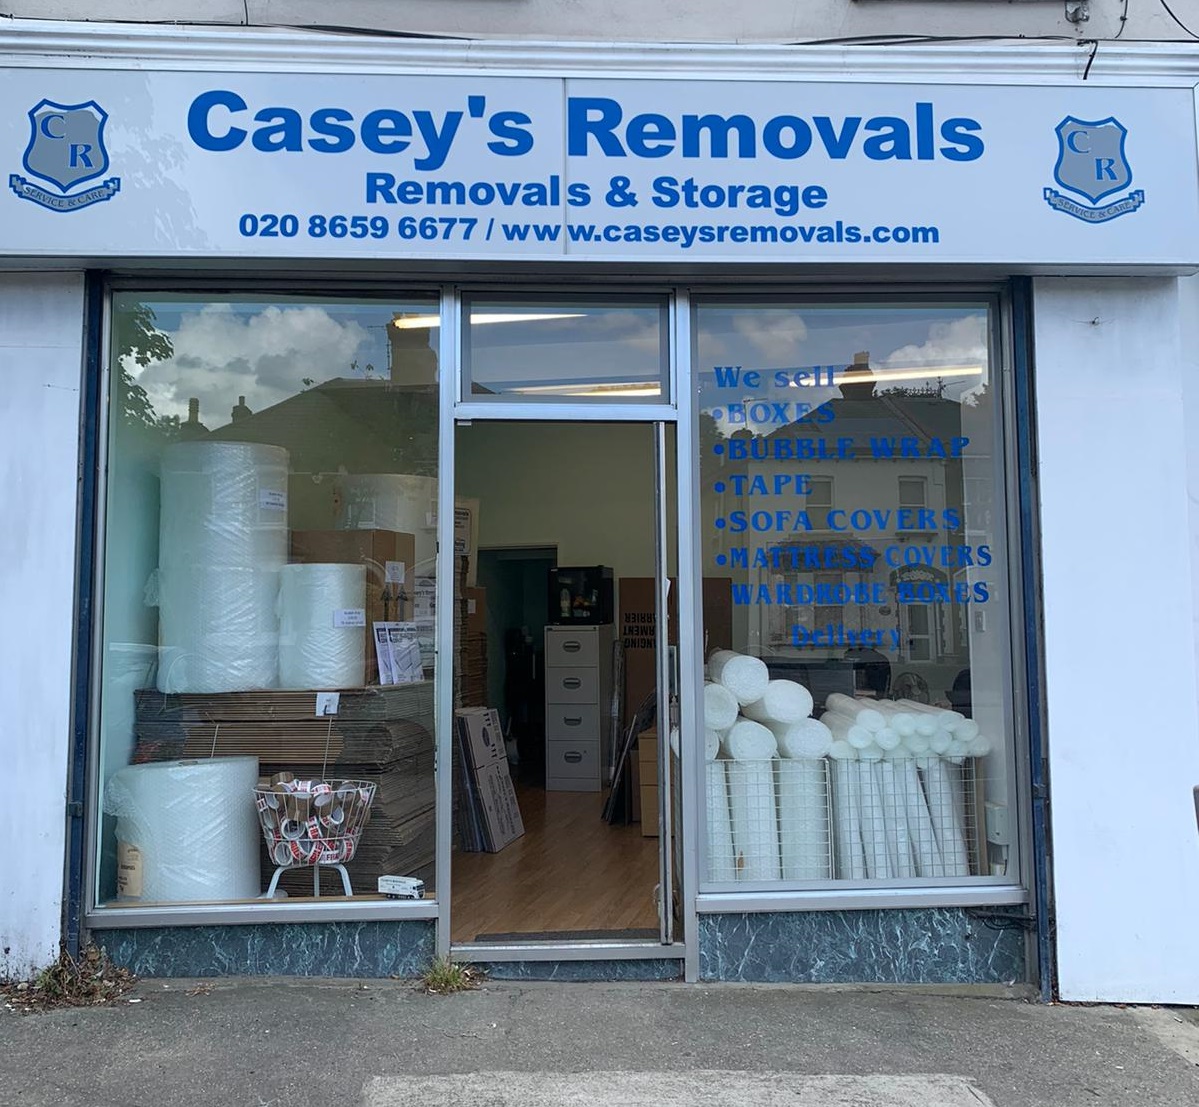 Exterior of Casey's Removals office and packing material shop in Beckenham